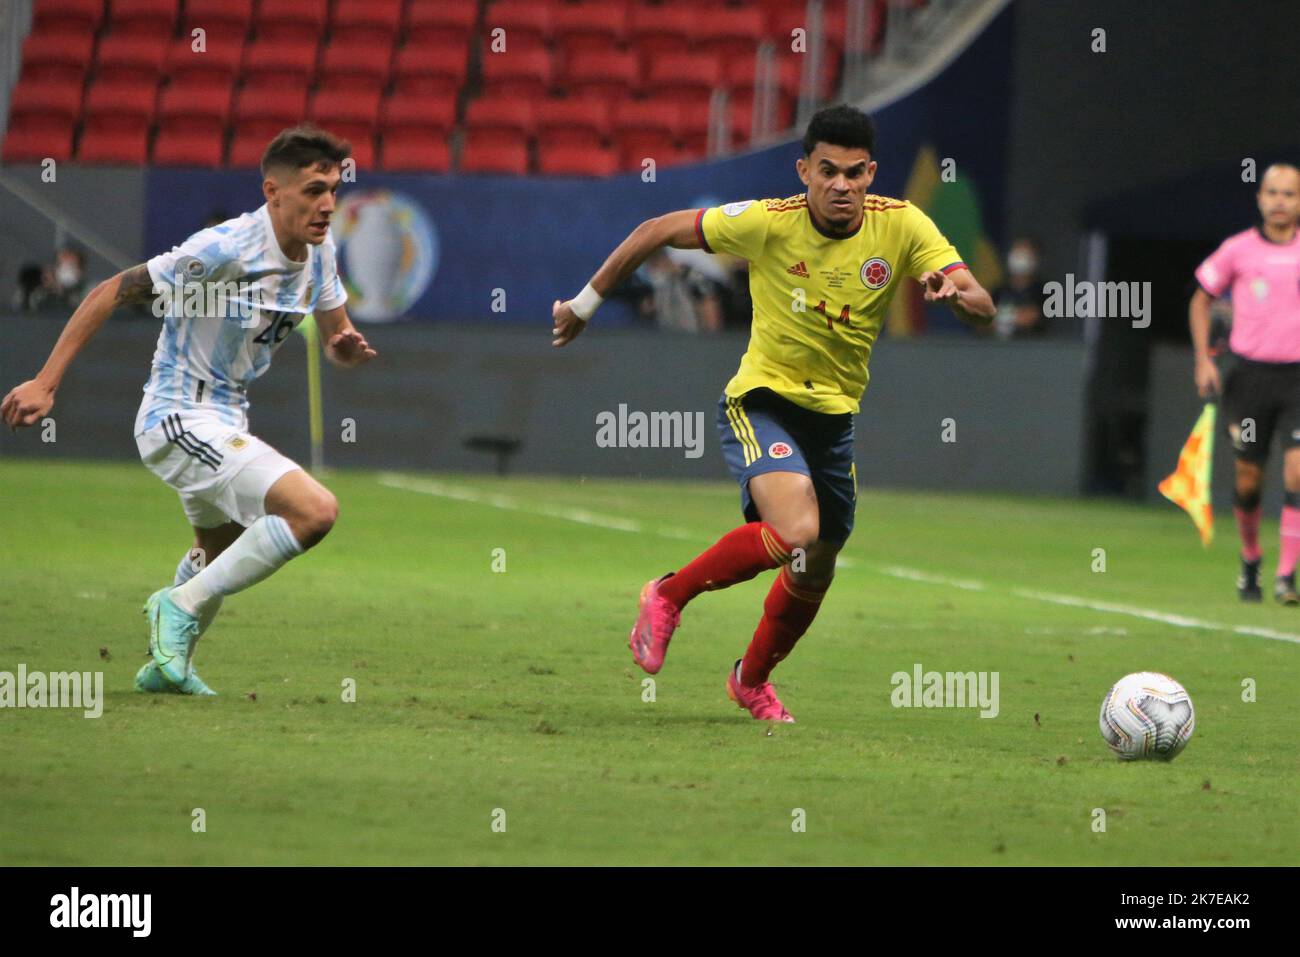 ©Laurent Lairys/MAXPPP - L Diaz of Colombia and N Molina of Argentine during the Copa America 2021, semi-final football match between Argentina and Colombia on July 6, 2021 at Estádio Nacional Mané Garrincha in Brasilia, Brazil photos Laurent Lairys /MAXPPP Stock Photo